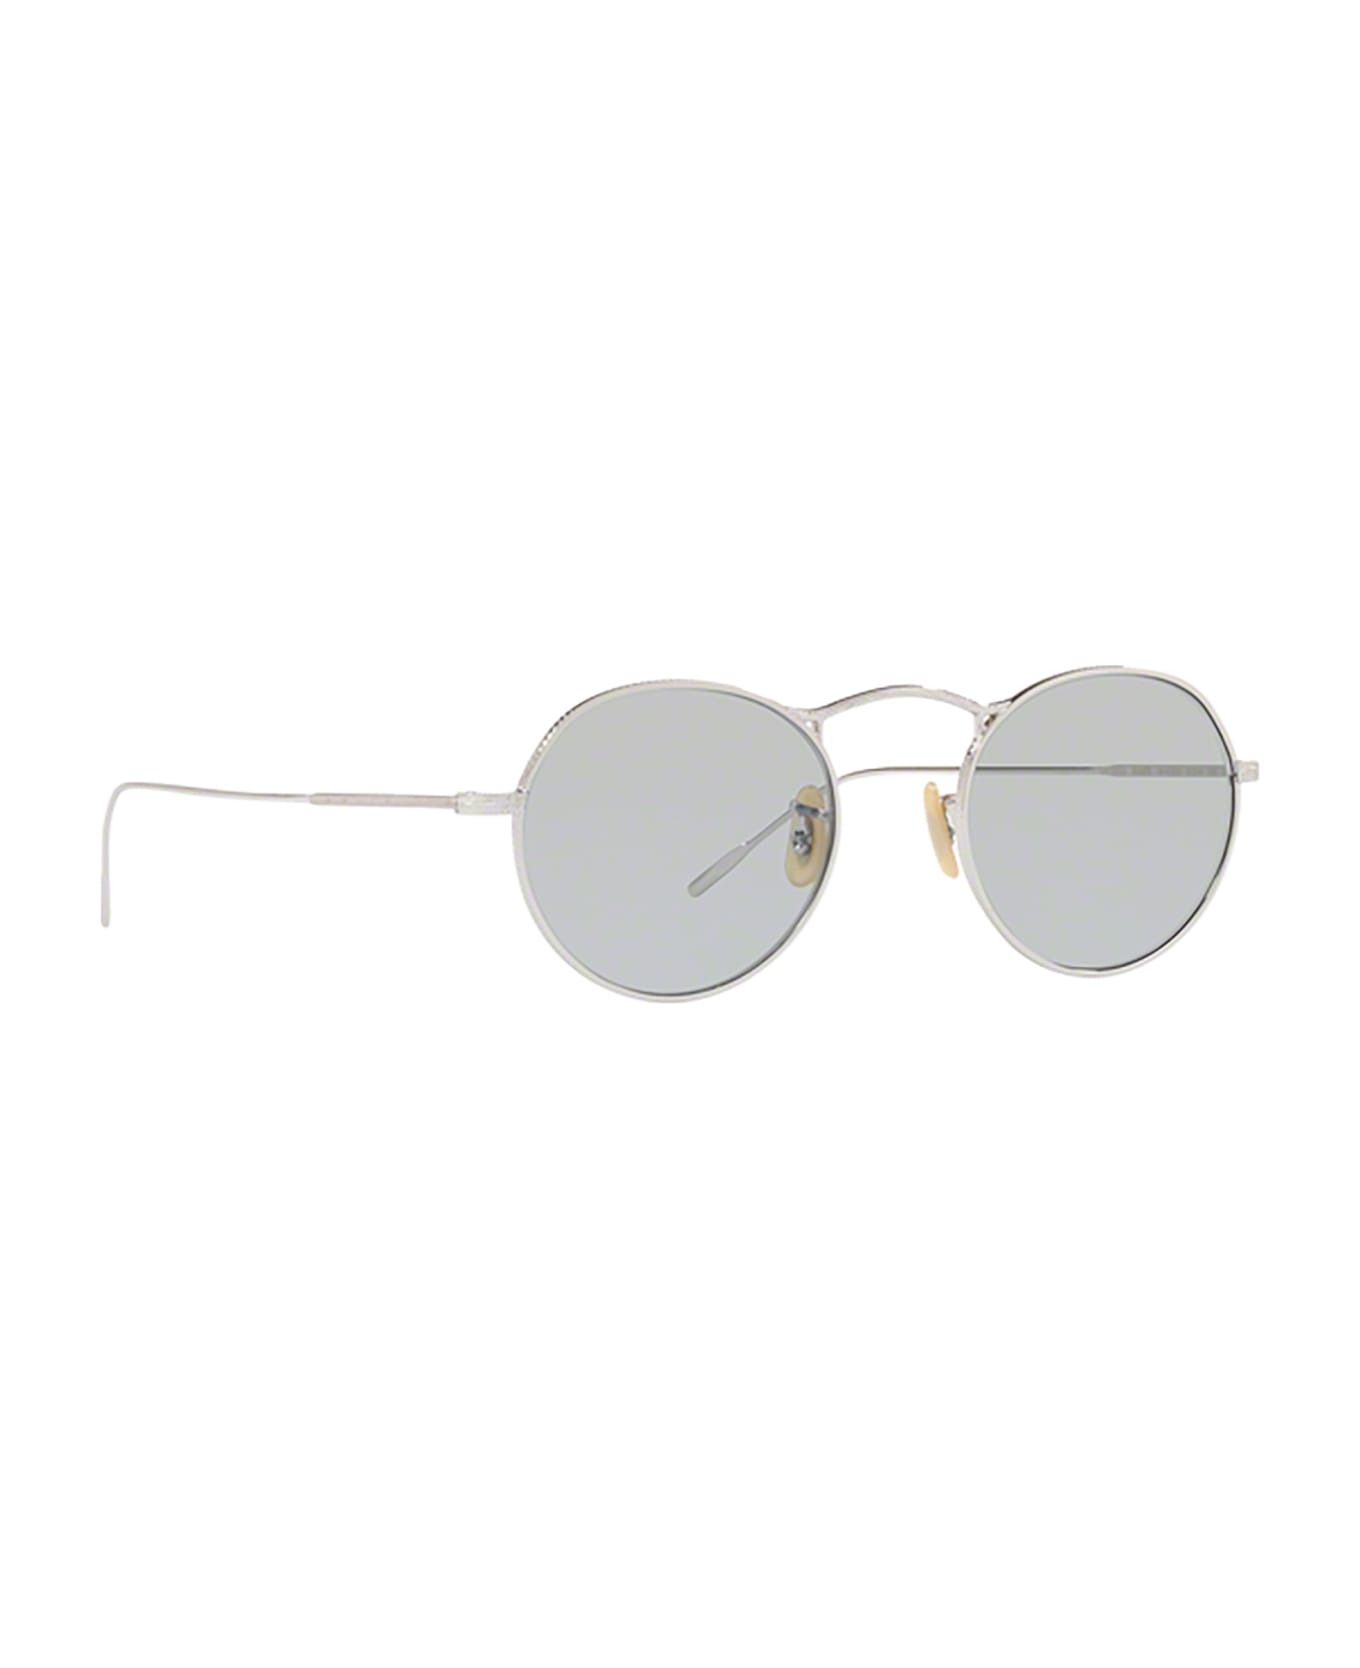 Oliver Peoples Ov1220s Silver Sunglasses - Silver